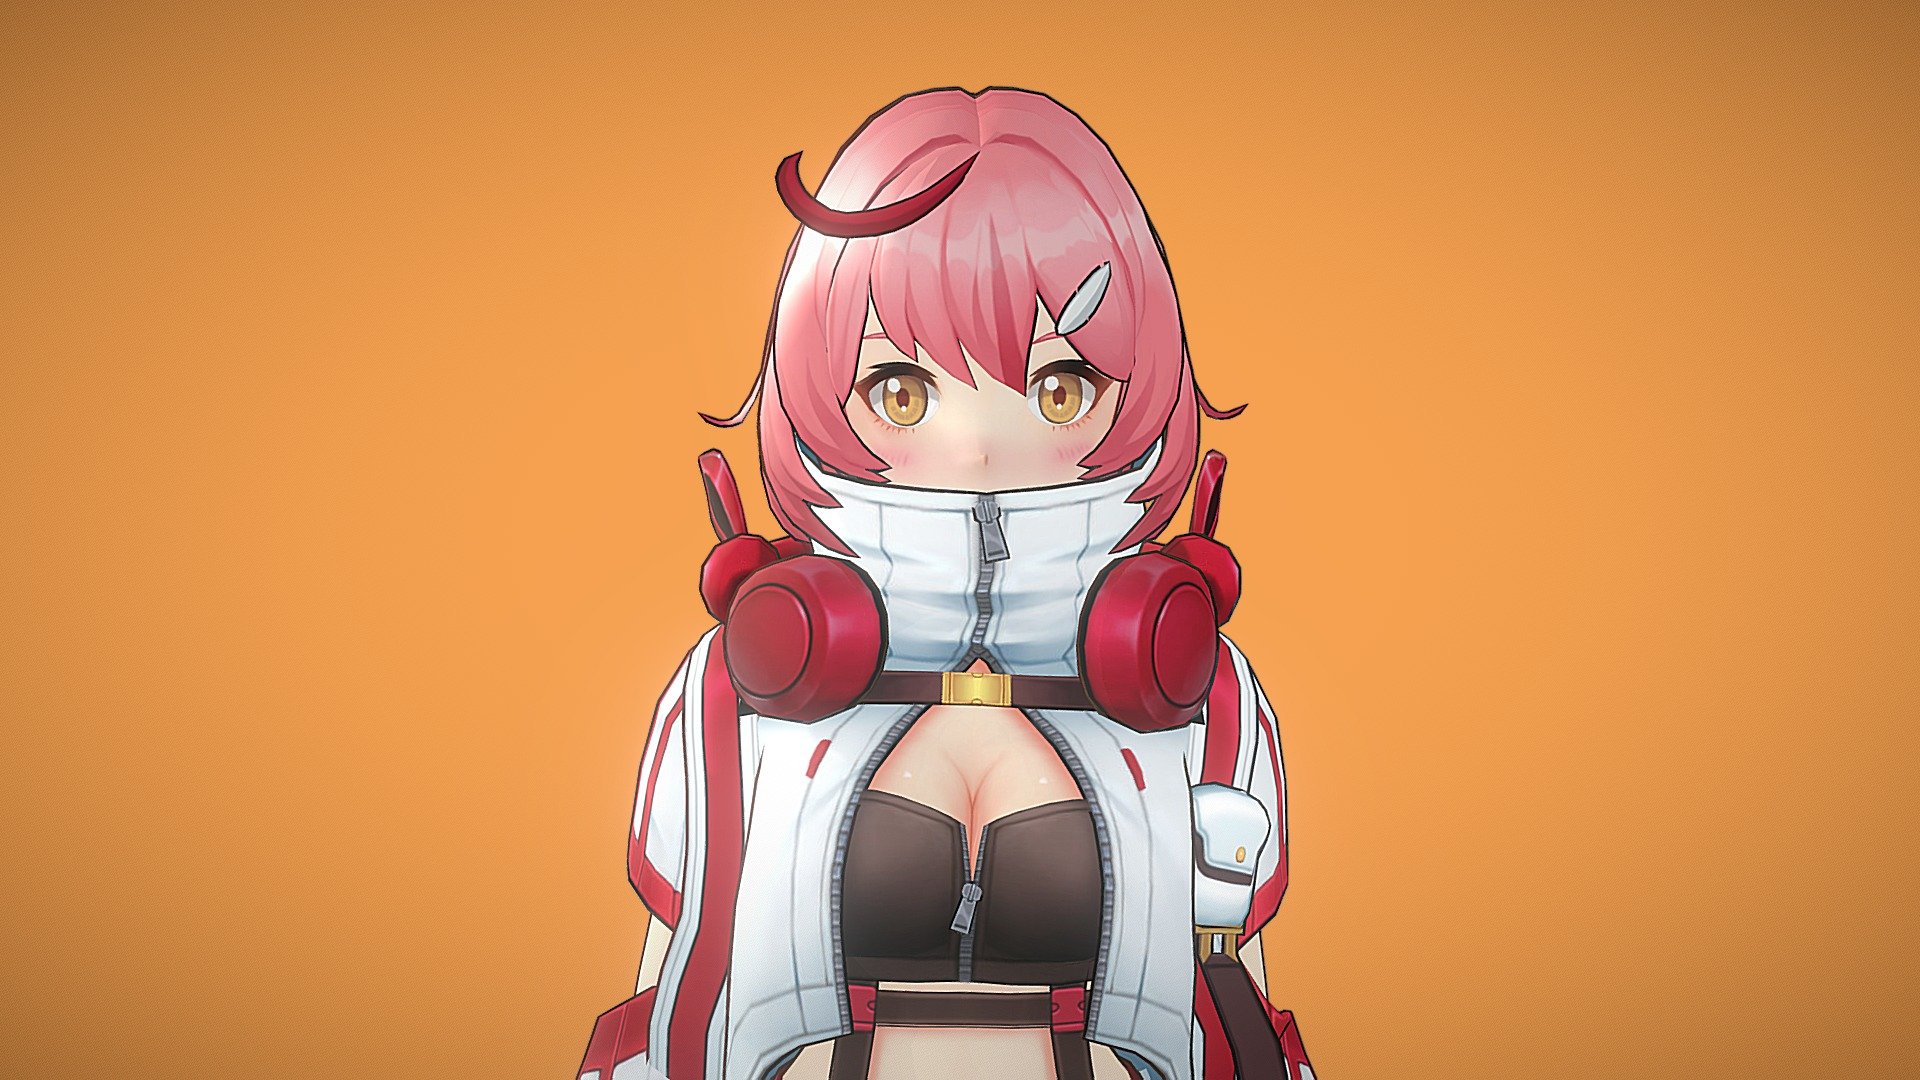 hello

In my project, I designed a character based on a school concept and did 3D modeling. 
This character is themed after a broadcasting club. I have uploaded it to Sketchfab so it can be viewed in a 3D viewer. 
You may refer to the modeling, but commercial use is not permitted.
Thank you.

안녕하세요

저는 프로젝트에서 스쿨컨셉에 캐릭터를 기획하고 3d모델링 했습니다.
이 캐릭터는 방송부 컨셉에 캐릭터 입니다. 3D 뷰어로 볼 수 있도록 스케치팹에 업로드했습니다.
모델링을 참고하실 수는 있지만, 상업적 사용은 허용되지 않습니다.
감사합니다.

ⓒ 2022. (NovaCore) all rights reserved 3d model